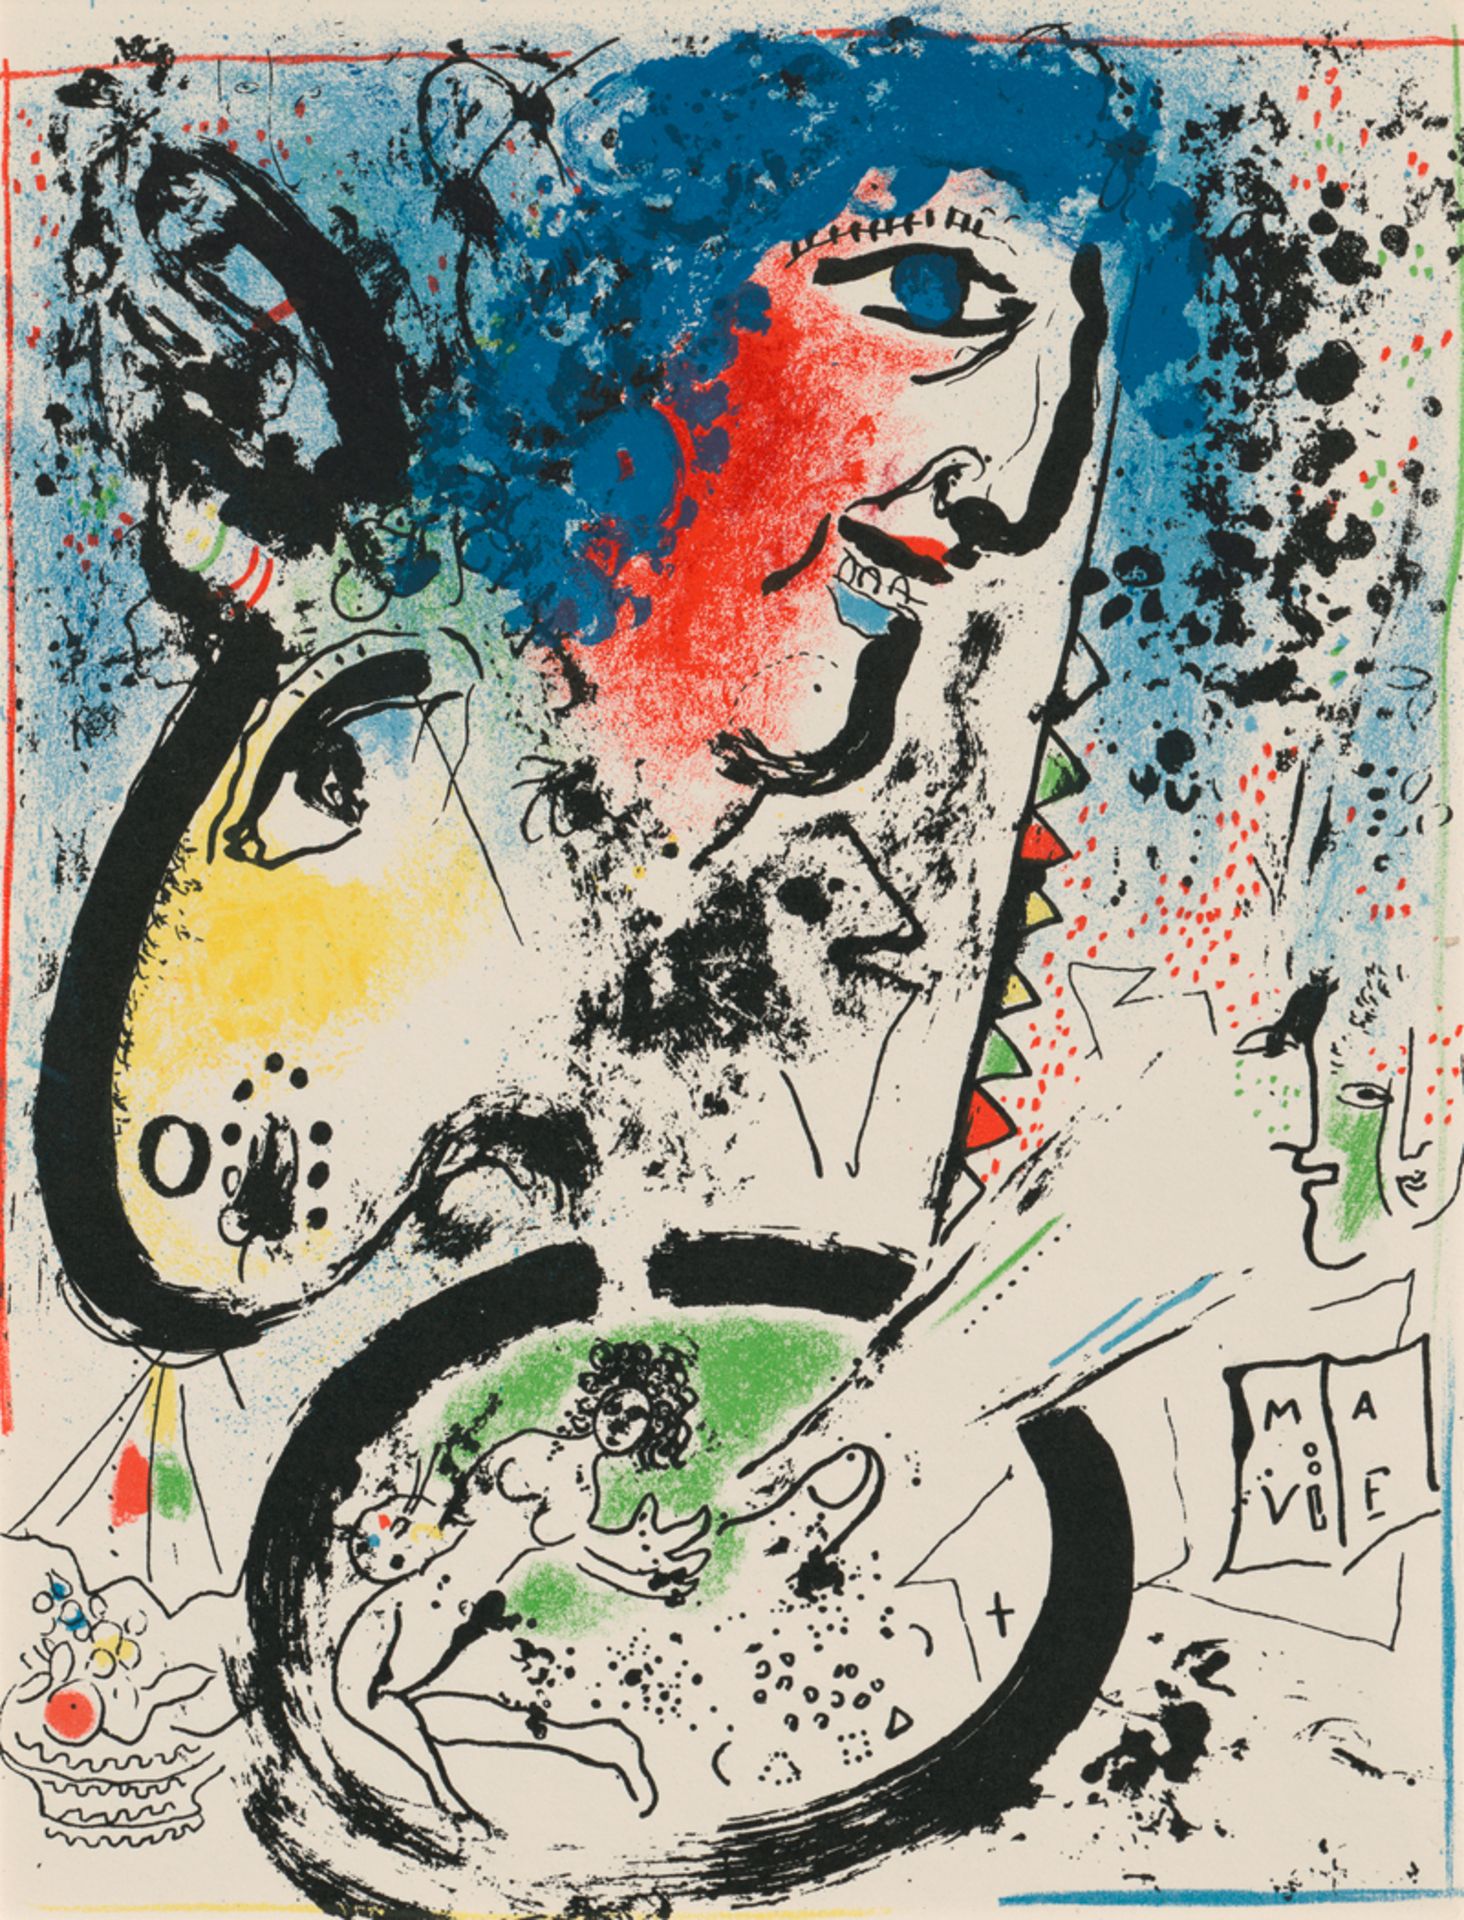 Chagall, Marc: Frontispice aus "Chagall Lithograph Tome I"